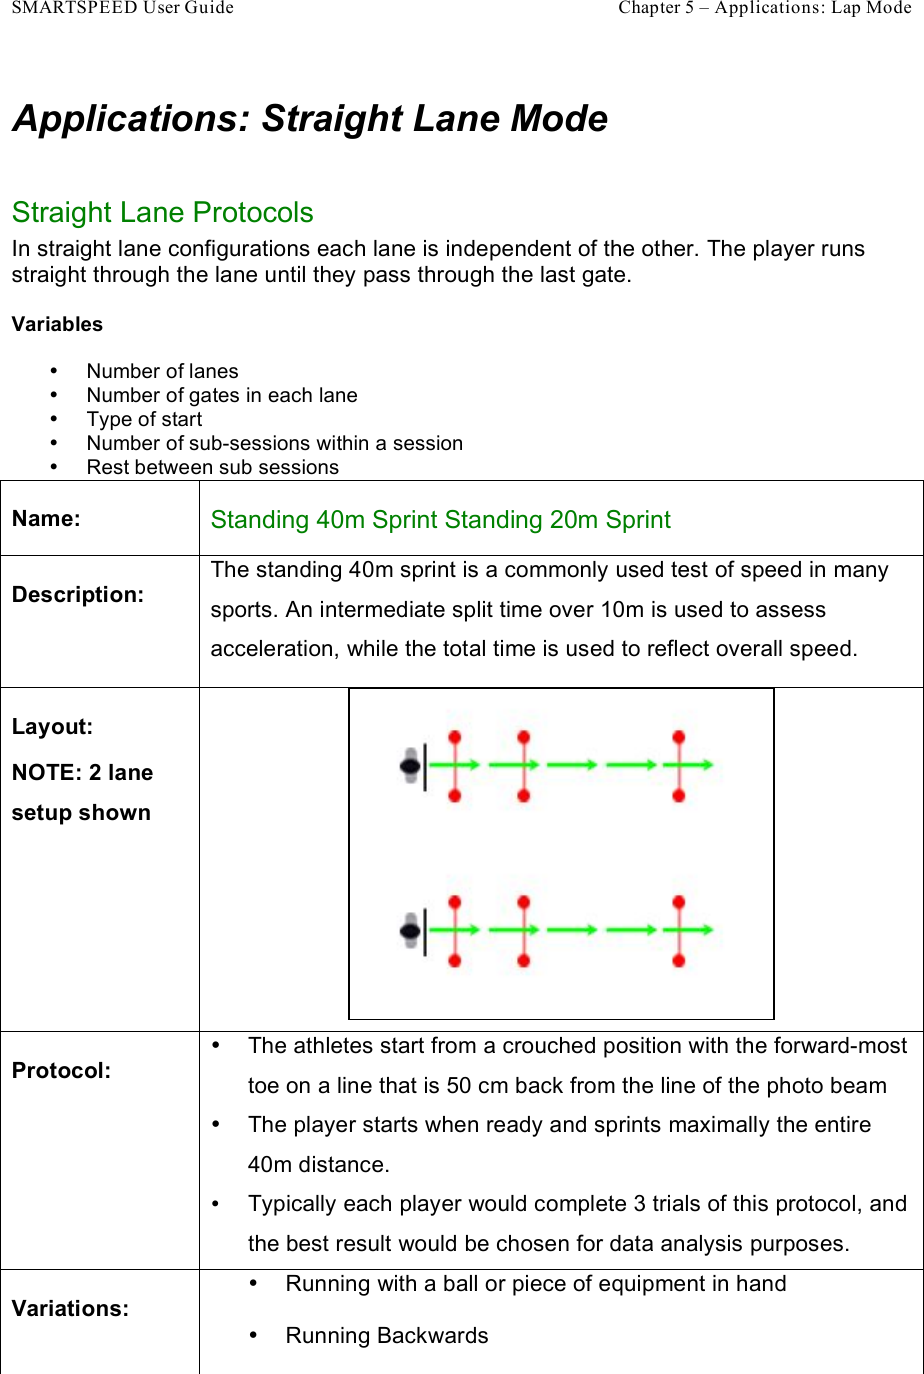 SMARTSPEED User Guide    Chapter 5 – Applications: Lap Mode Applications: Straight Lane Mode  Straight Lane Protocols In straight lane configurations each lane is independent of the other. The player runs straight through the lane until they pass through the last gate.  Variables  •  Number of lanes •  Number of gates in each lane •  Type of start •  Number of sub-sessions within a session •  Rest between sub sessions Name: Standing 40m Sprint Standing 20m Sprint Description: The standing 40m sprint is a commonly used test of speed in many sports. An intermediate split time over 10m is used to assess acceleration, while the total time is used to reflect overall speed. Layout: NOTE: 2 lane setup shown  Protocol: •  The athletes start from a crouched position with the forward-most toe on a line that is 50 cm back from the line of the photo beam  •  The player starts when ready and sprints maximally the entire 40m distance.  • Typically each player would complete 3 trials of this protocol, and the best result would be chosen for data analysis purposes. Variations: •  Running with a ball or piece of equipment in hand •  Running Backwards 